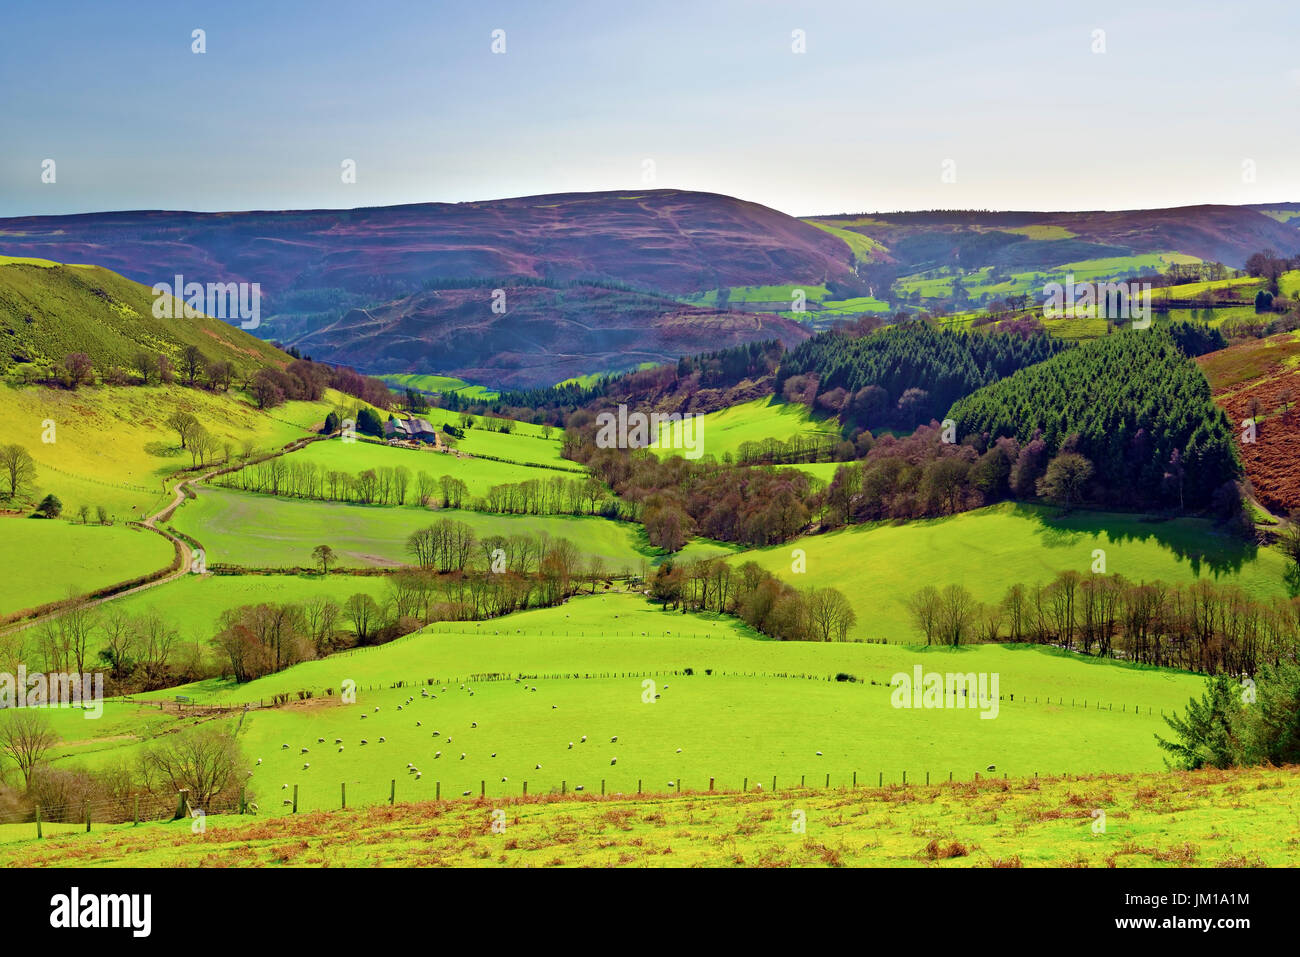 A view from Llantysilio of the Clwydian hills and mountains, North Wales, UK Stock Photo